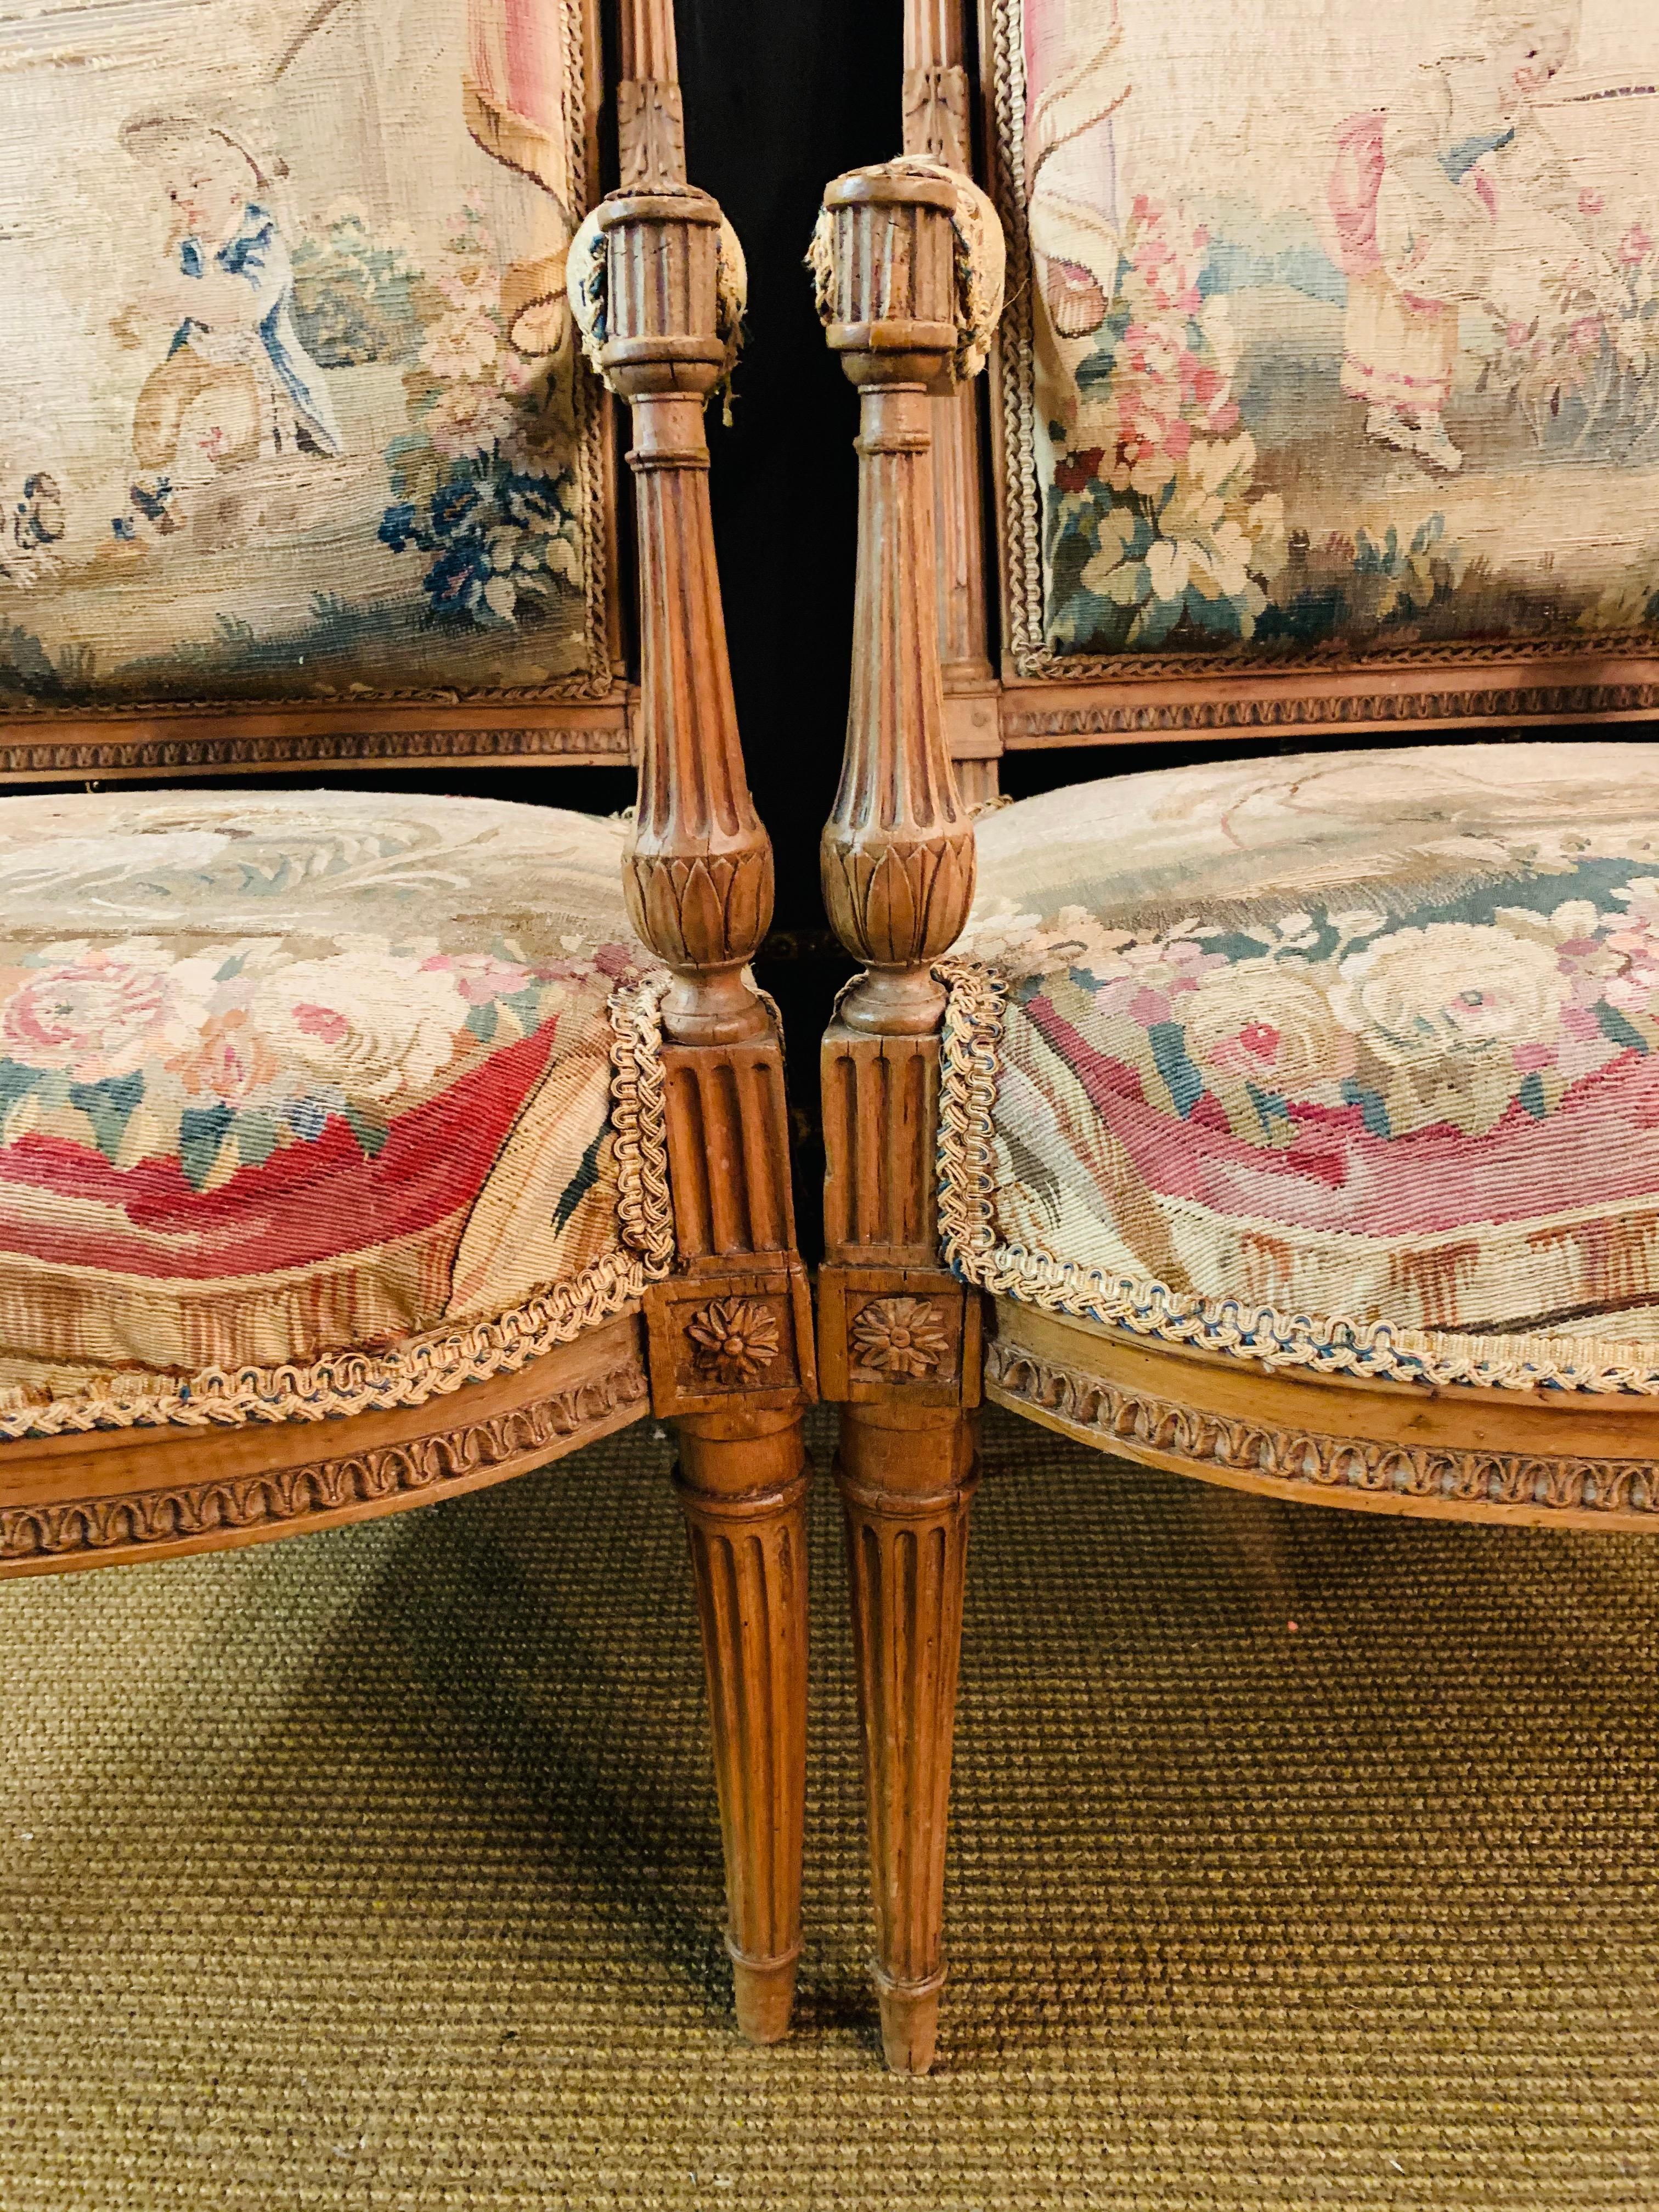 Hand-Carved Unique Salon Chairs, France 19th Century, Solid Beech with Oak Tapestry/Gobelin